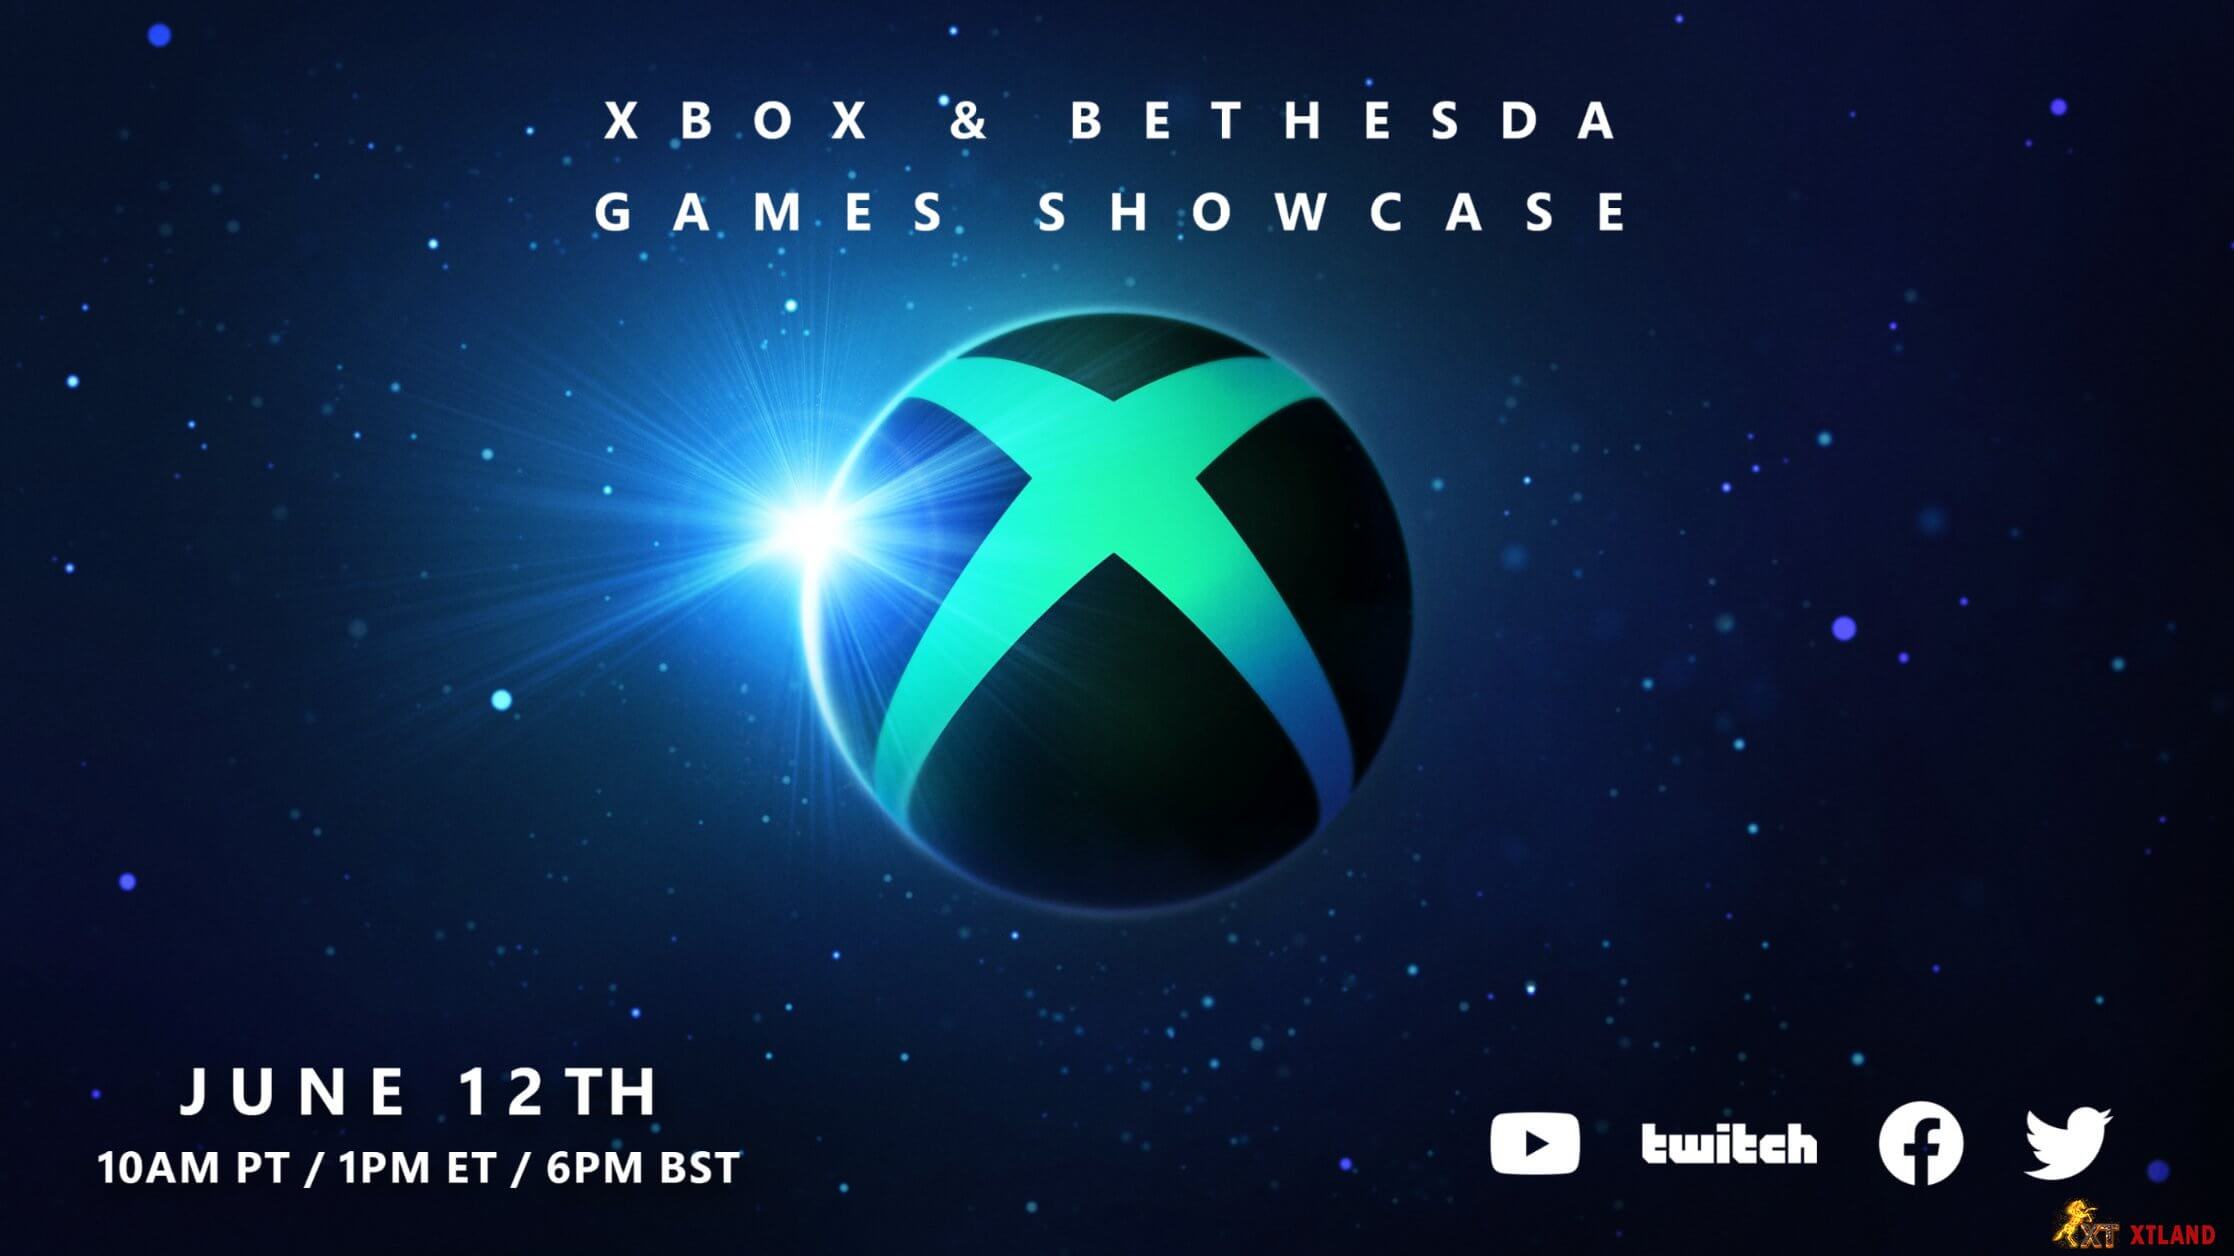 Xbox and Bethesda Games Showcase Announced for June 12th